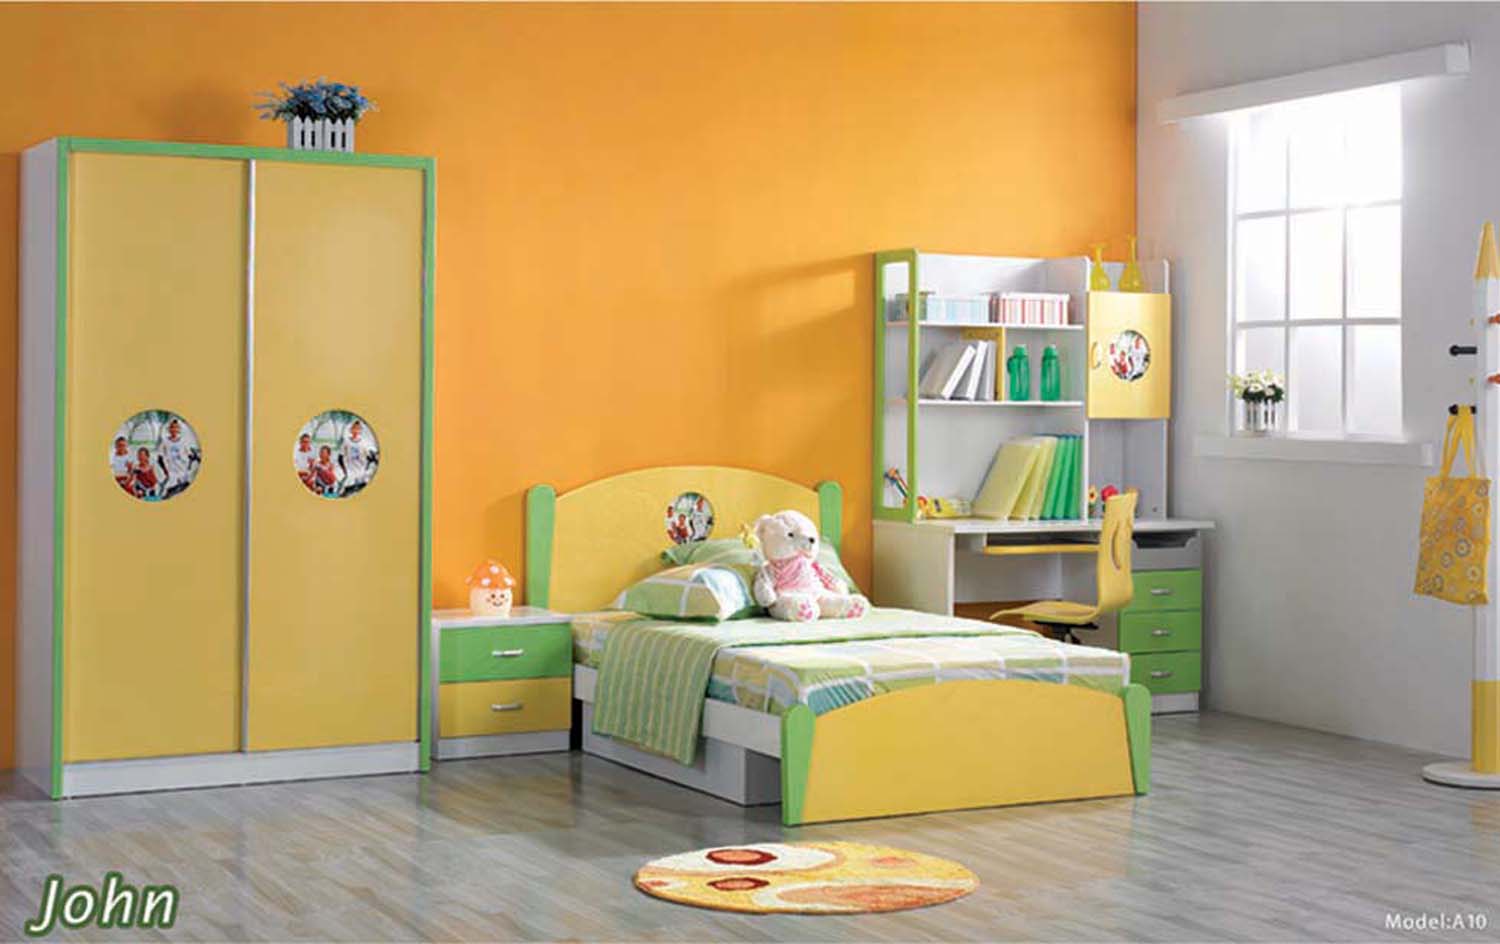 Awesome Kids Bedroomwith Colorful Set Furniture Cupboard With Picture Varnished Floor Pillow Dool Cute Lamp Round Fur Rug Chair Storage Book Flower And Window Kids Room